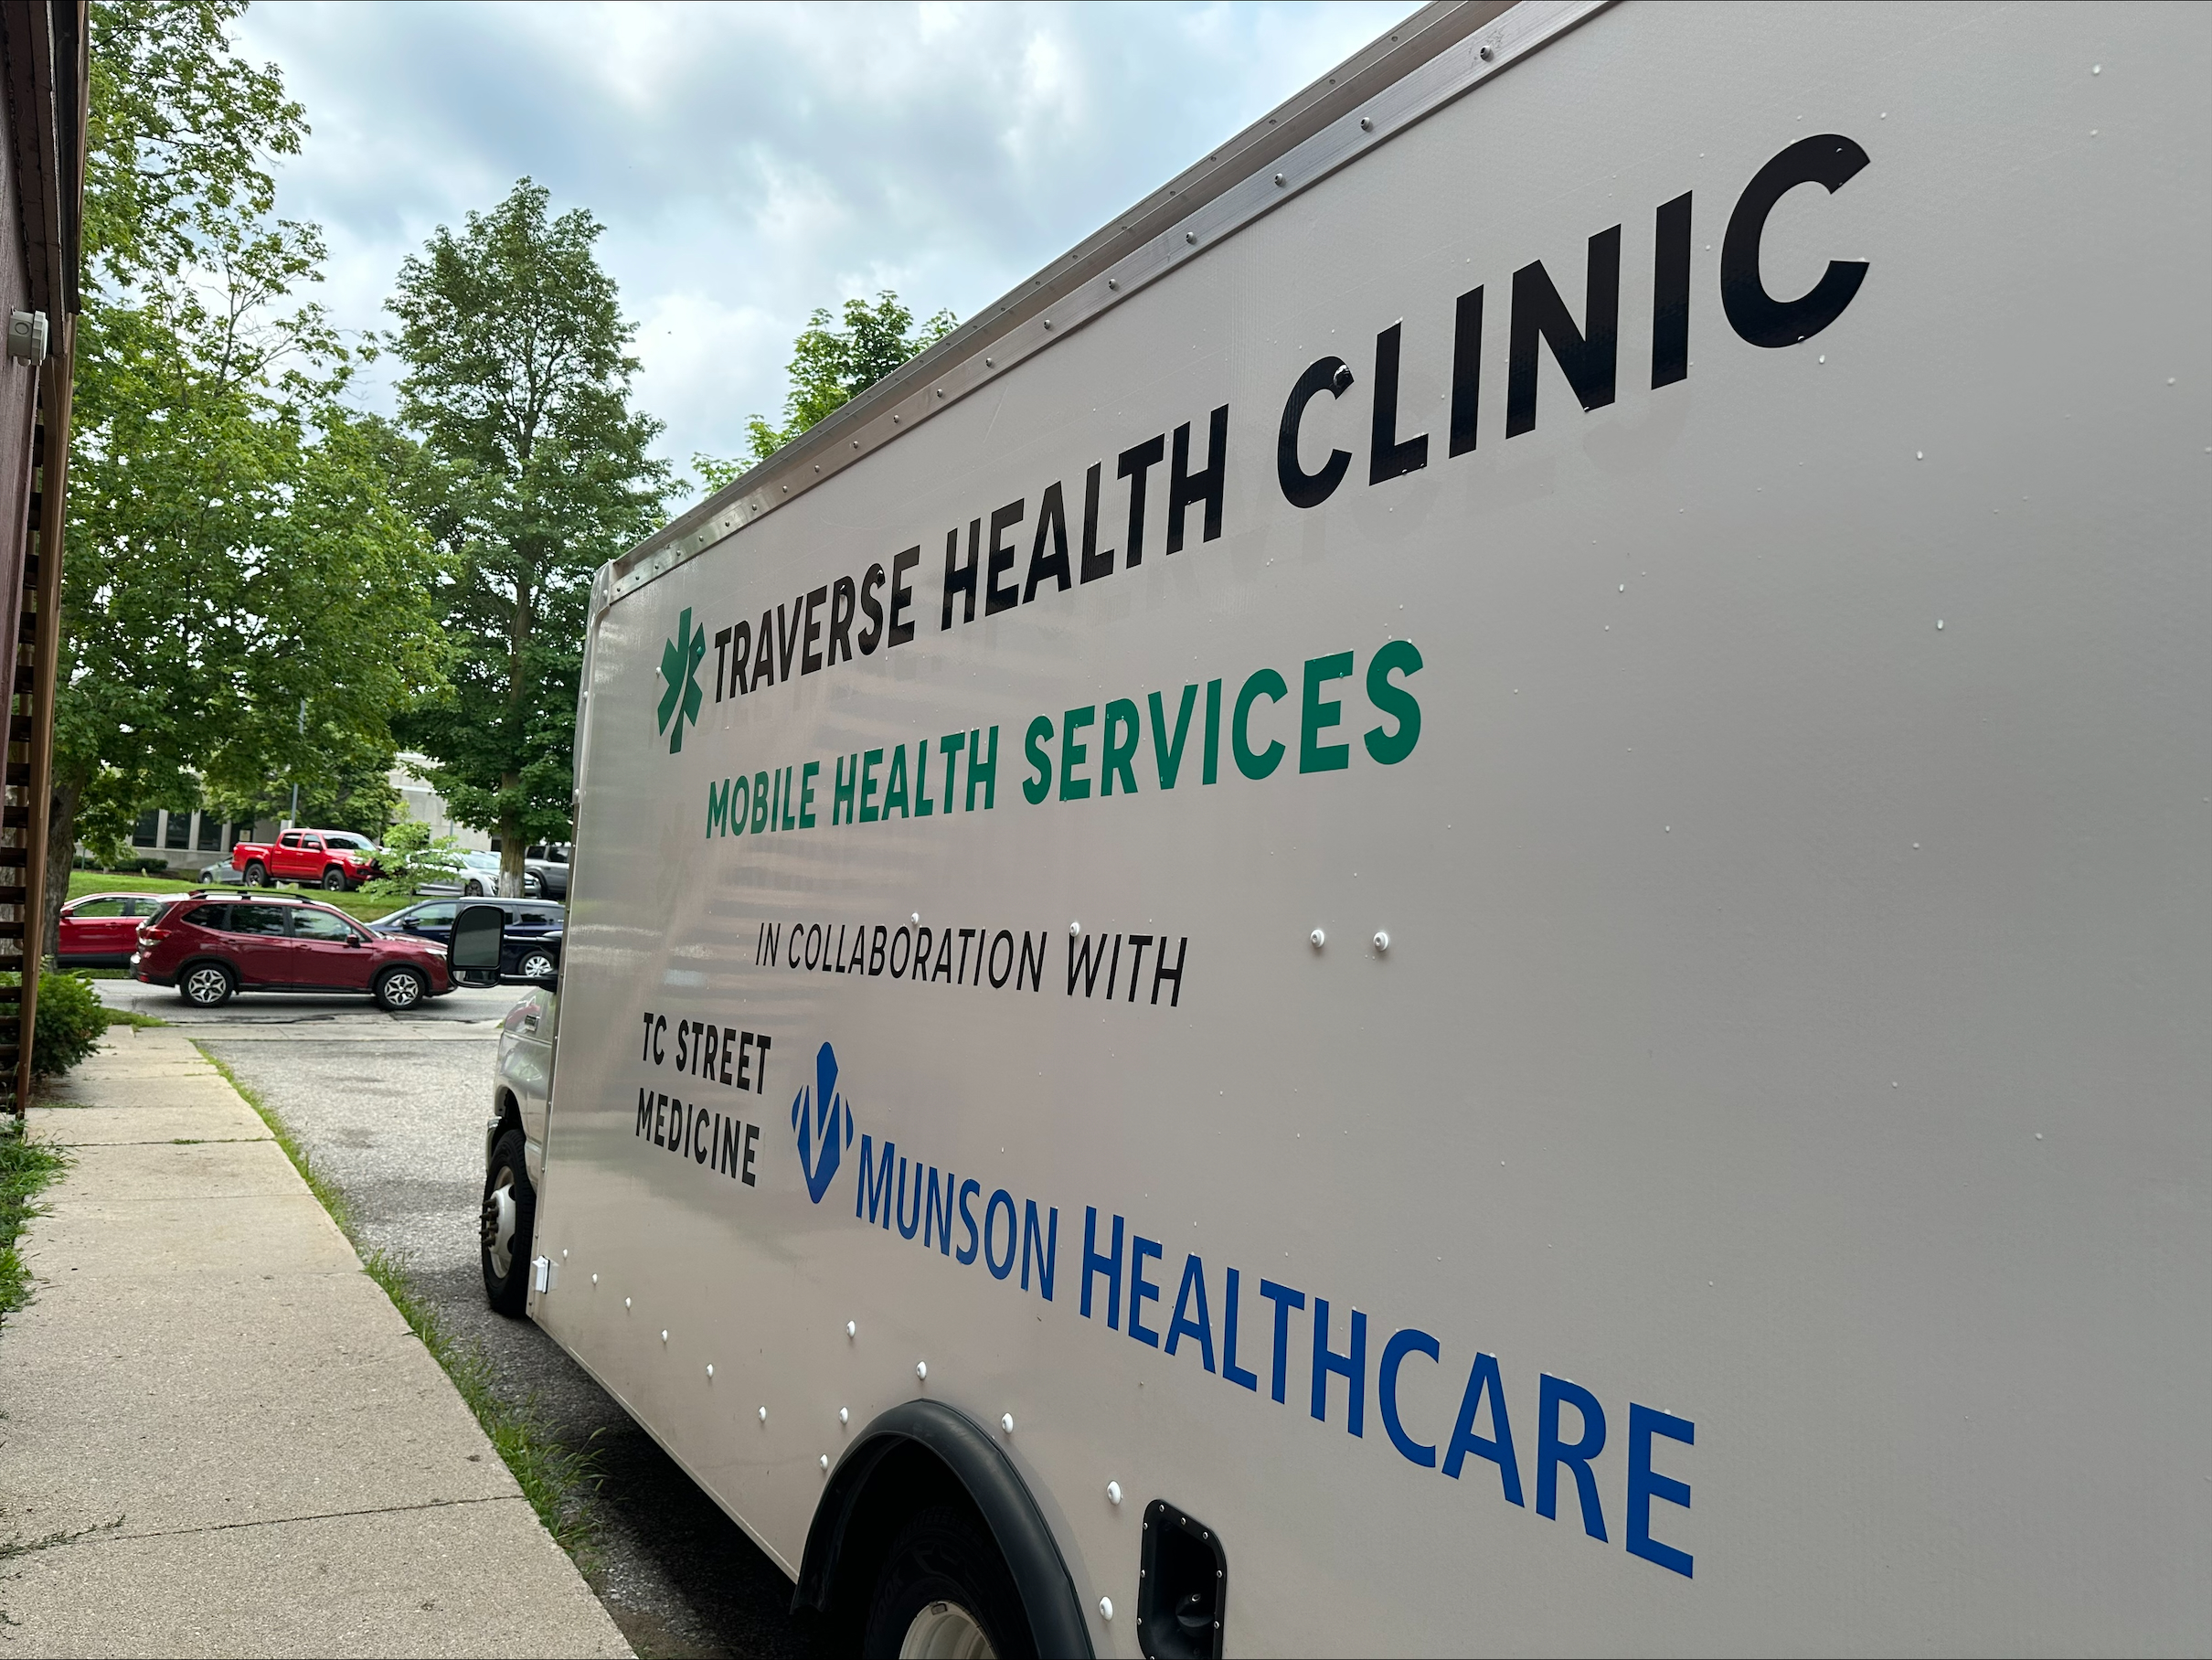 Munson Commits $300,000 to Traverse Health Clinic for Street Medicine Program Support